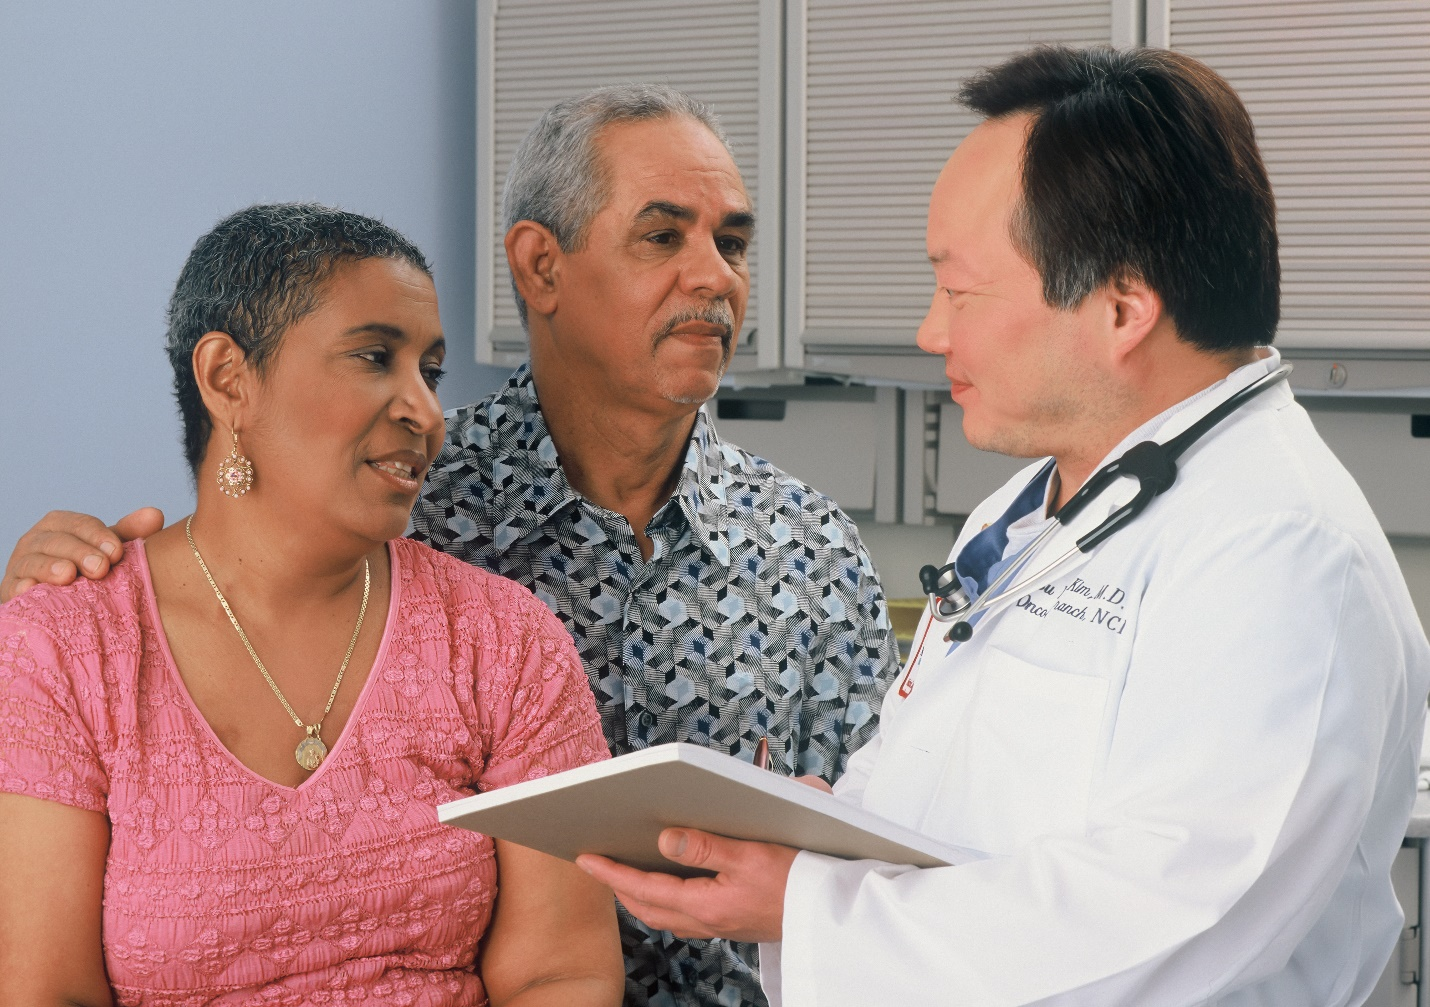 A man and woman discussing their case with a doctor